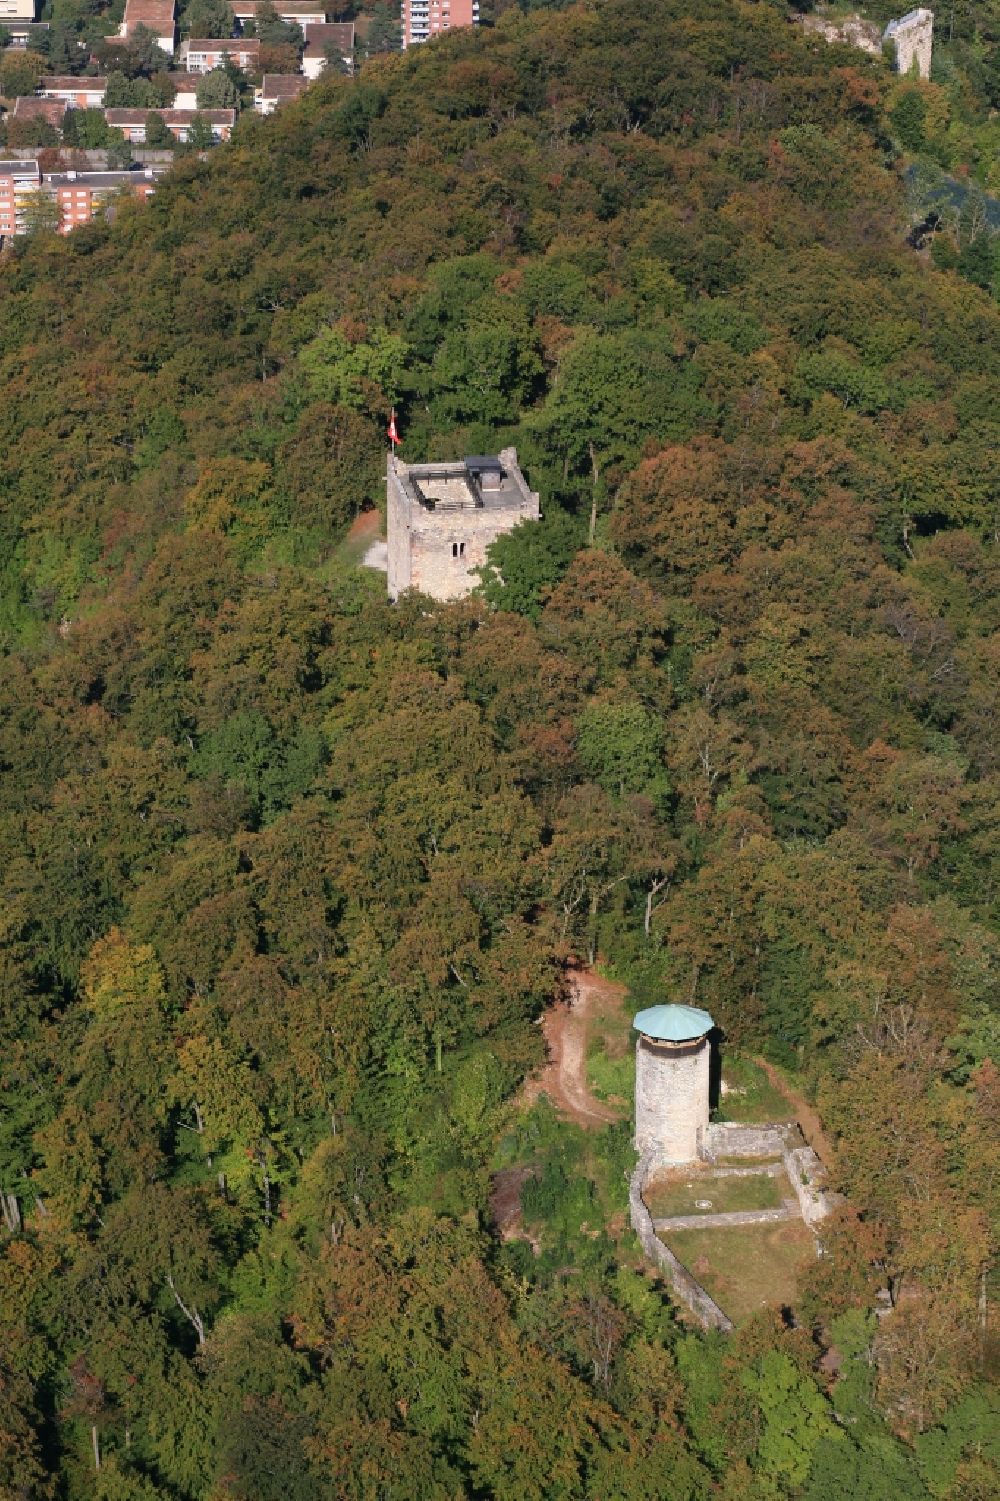 Aerial image Muttenz - Ruins and vestiges of the former castle and fortress Wartenberg in Muttenz in Basel-Landschaft, Switzerland